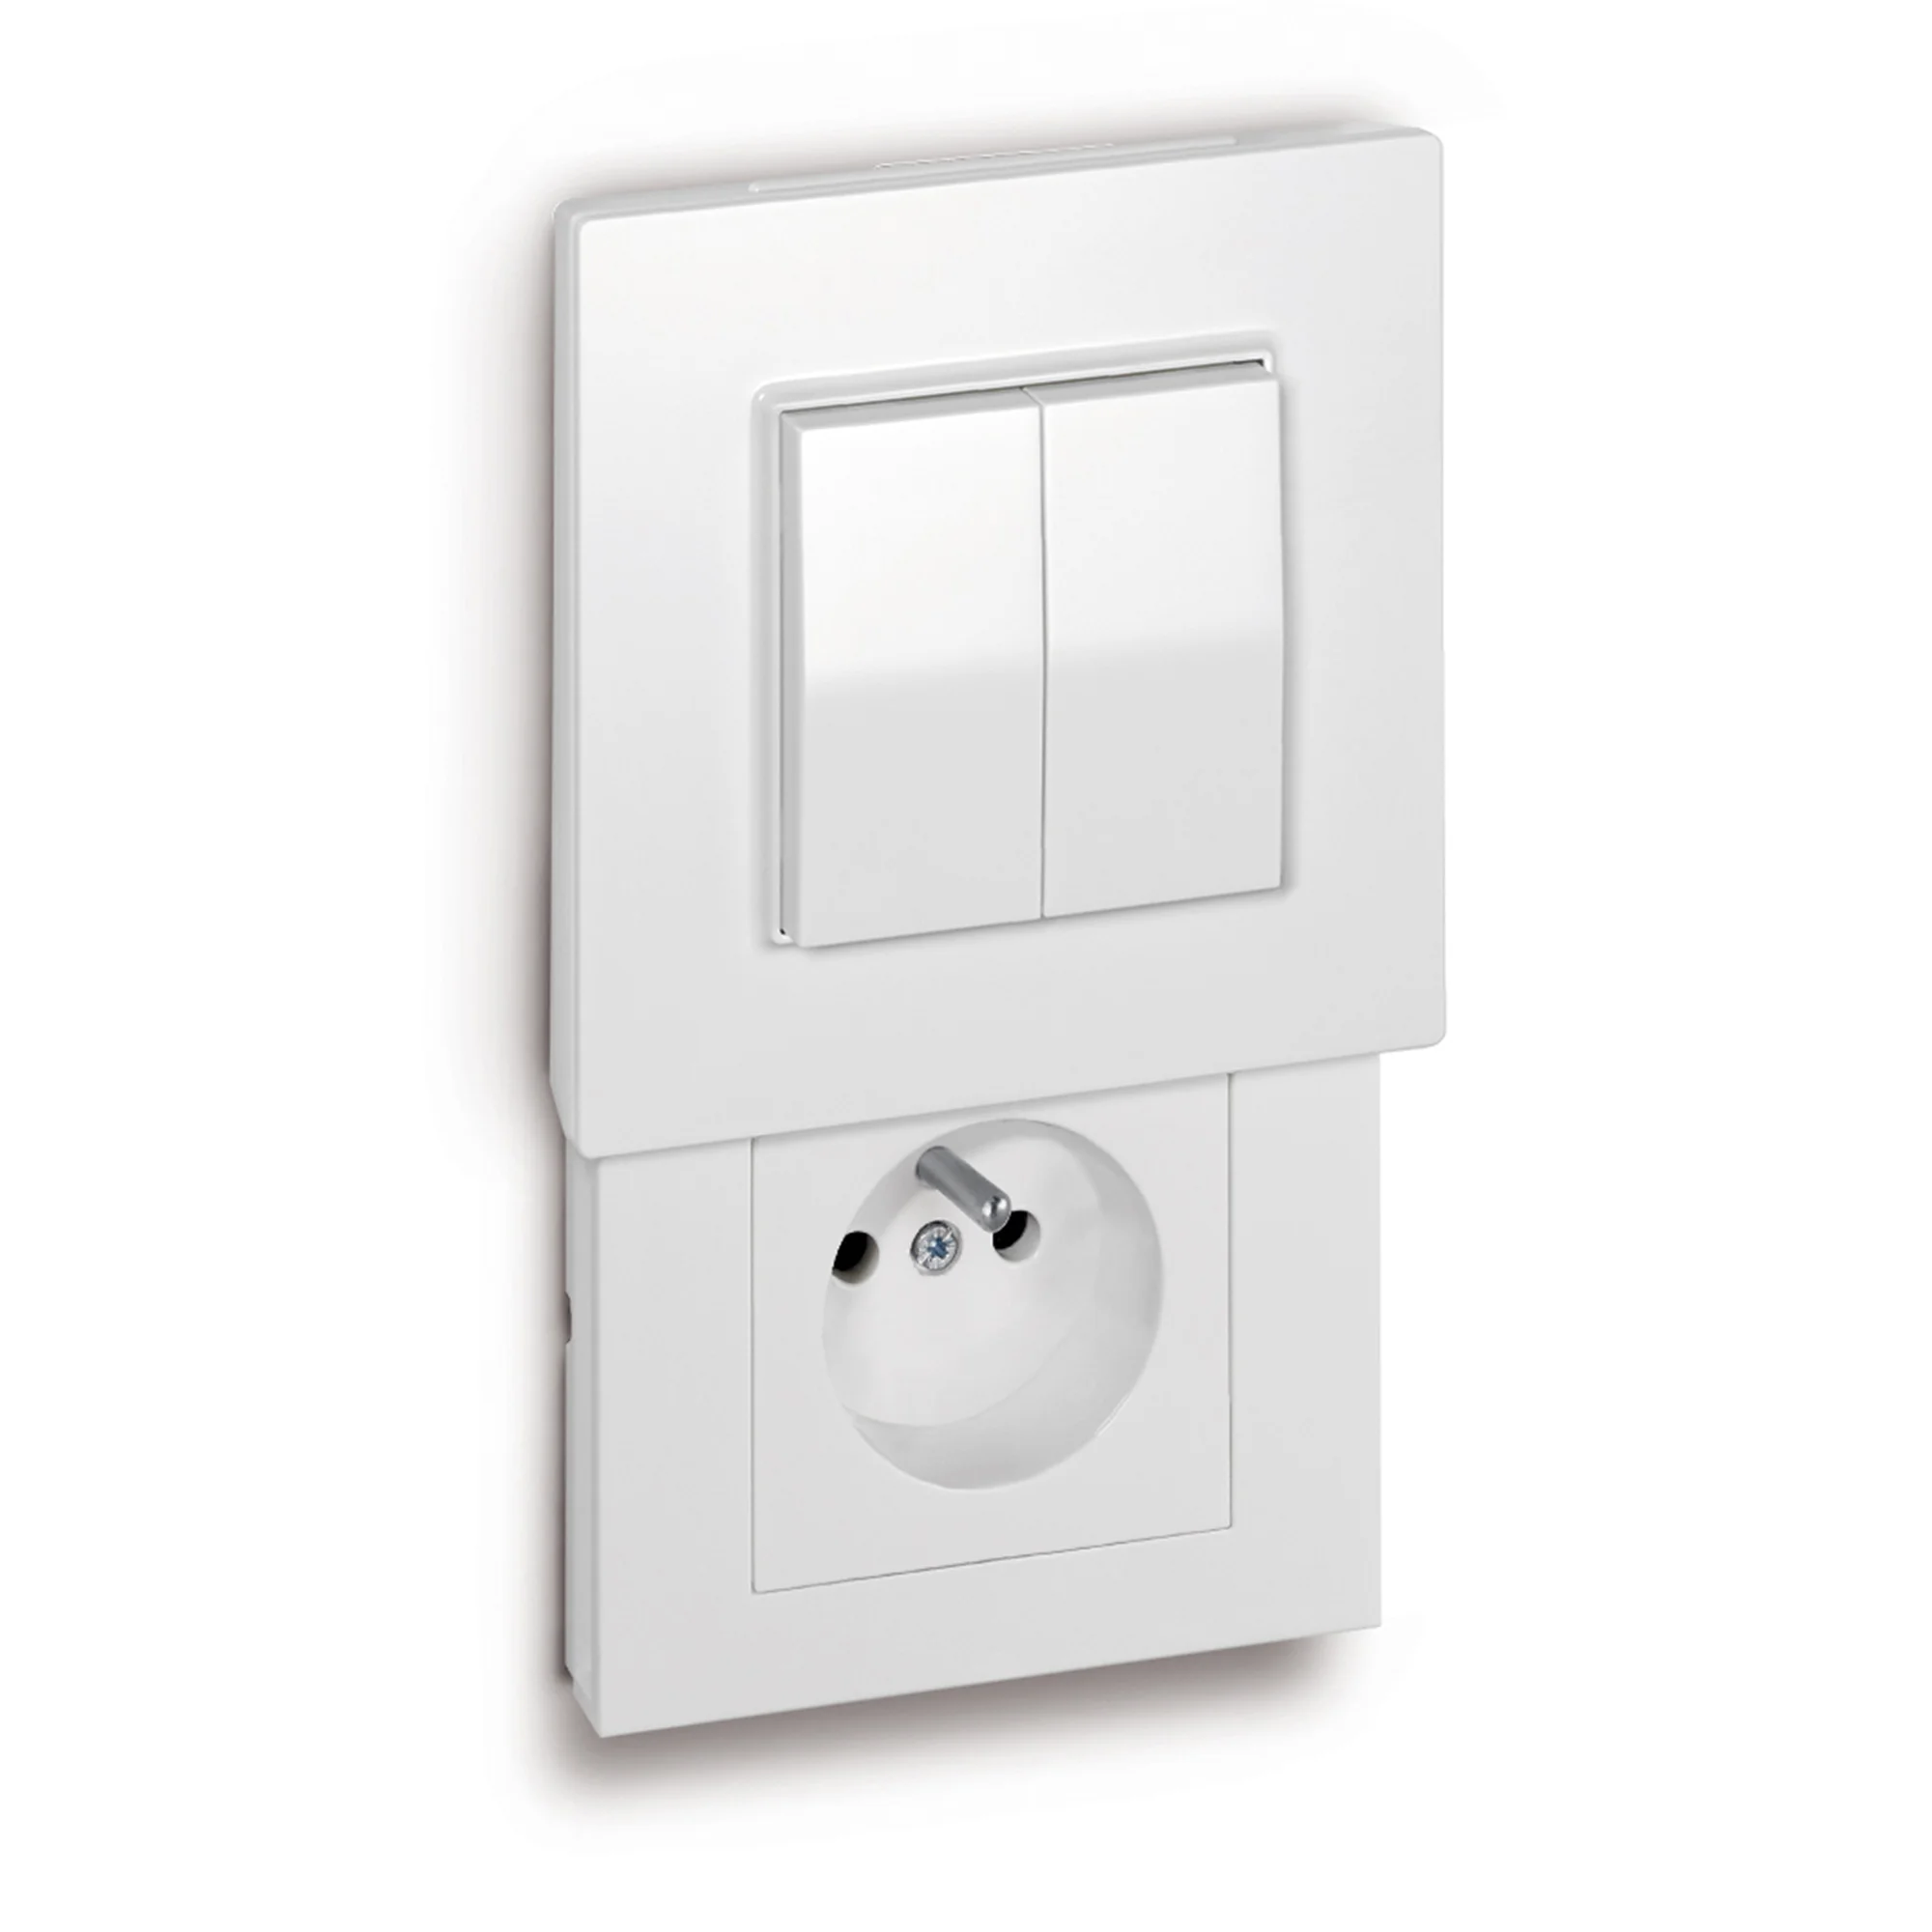 Hidden Socket | Versteckdose® with Friends of Hue switch with socket insert for plug type E (FR, BE)